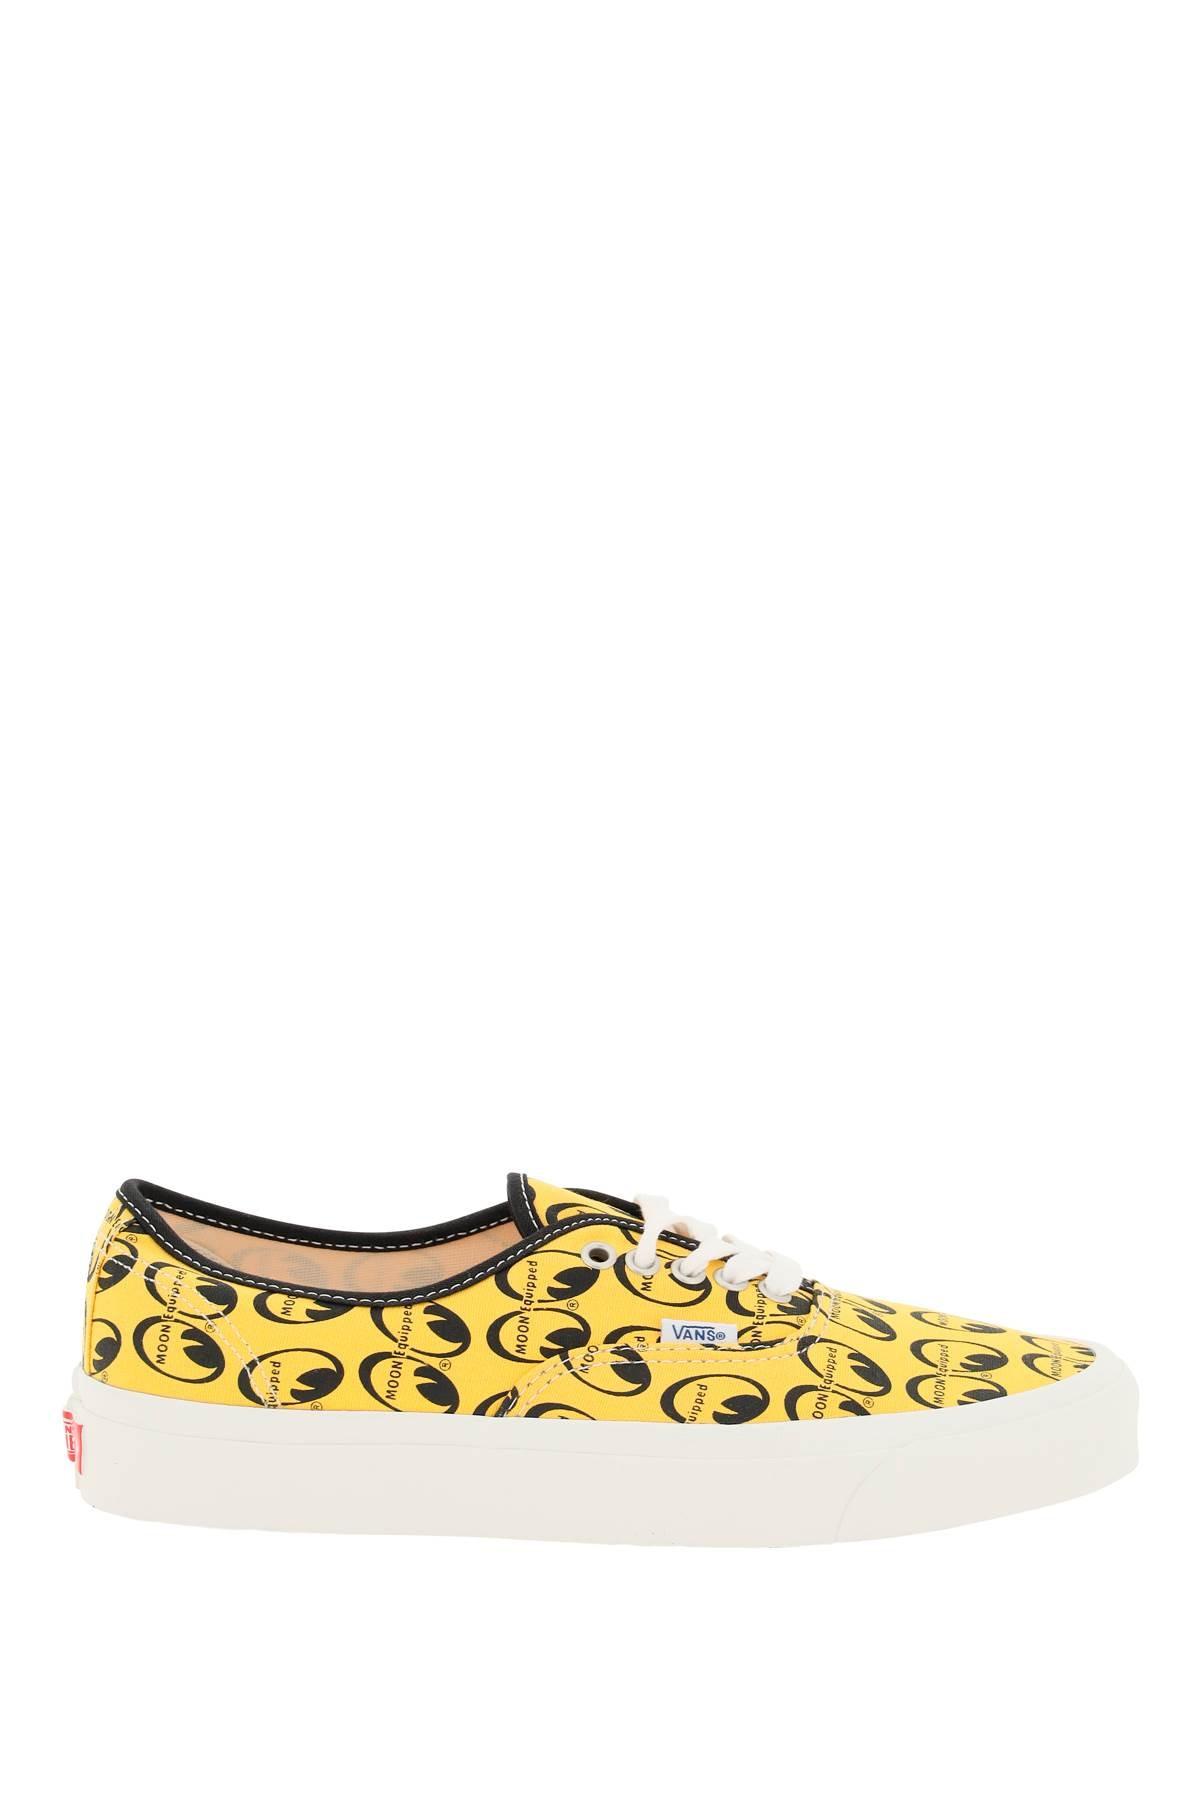 Vans Cotton Authentic 44 Dx Sneakers With Mooneye Print for Men - Save 46%  | Lyst